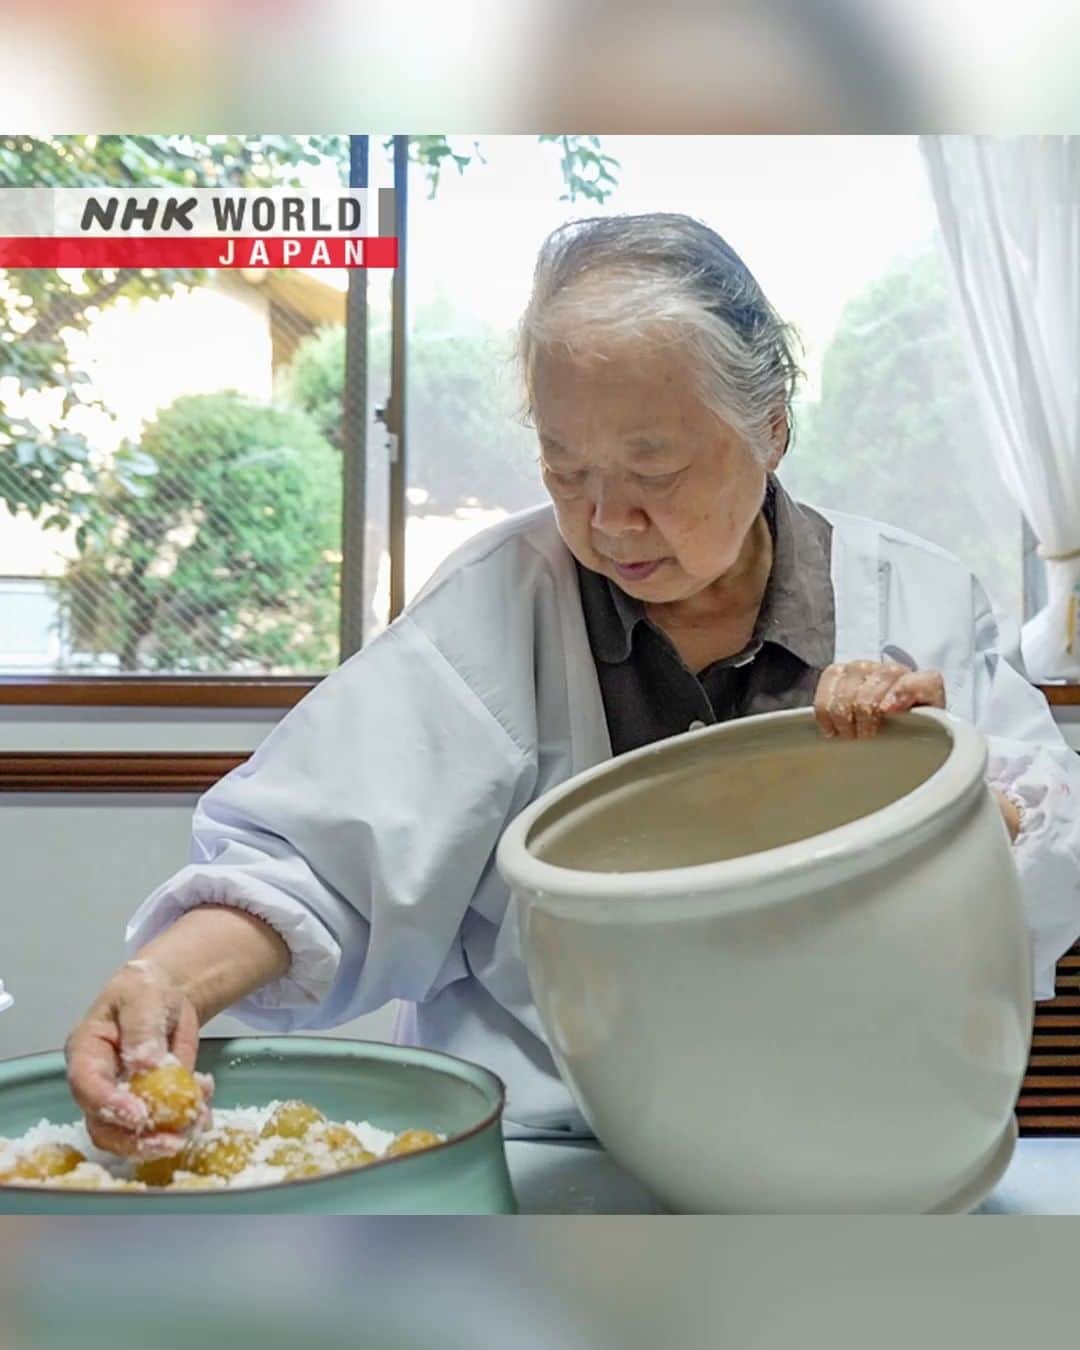 NHK「WORLD-JAPAN」のインスタグラム：「100-year-old-plus umeboshi pickled plums, found stored under the floor of a restaurant more than half a century ago, inspired Norimatsu Sachiko to start making these salty/sour delicacies.😋  To this day, those original umeboshi are still good to eat!😄 . 👉 Discover how this 82-year-old makes these traditional Japanese pickled fruits｜Watch｜Through The Kitchen Window: Passing on Pickled Plums for Posterity ｜Watch｜Free On Demand｜NHK WORLD-JAPAN website.👀 . 👉Tap in Stories/Highlights to get there.👆 . 👉Follow the link in our bio for more on the latest from Japan. . 👉If we’re on your Favorites list you won’t miss a post. . . #umeboshi #ume #perilla #shiso #sugitaume #akashiso #umevinegar #redperilla #redshiso #梅干し #しそ #pickledplums #fermentedfoods #fermentation #すっぱい #goodbacteria #japanfoodie #japanesefood #japanesecuisine #japanfood #japaneats #tokyo #discoverjapan #nhkworldjapan #japan」